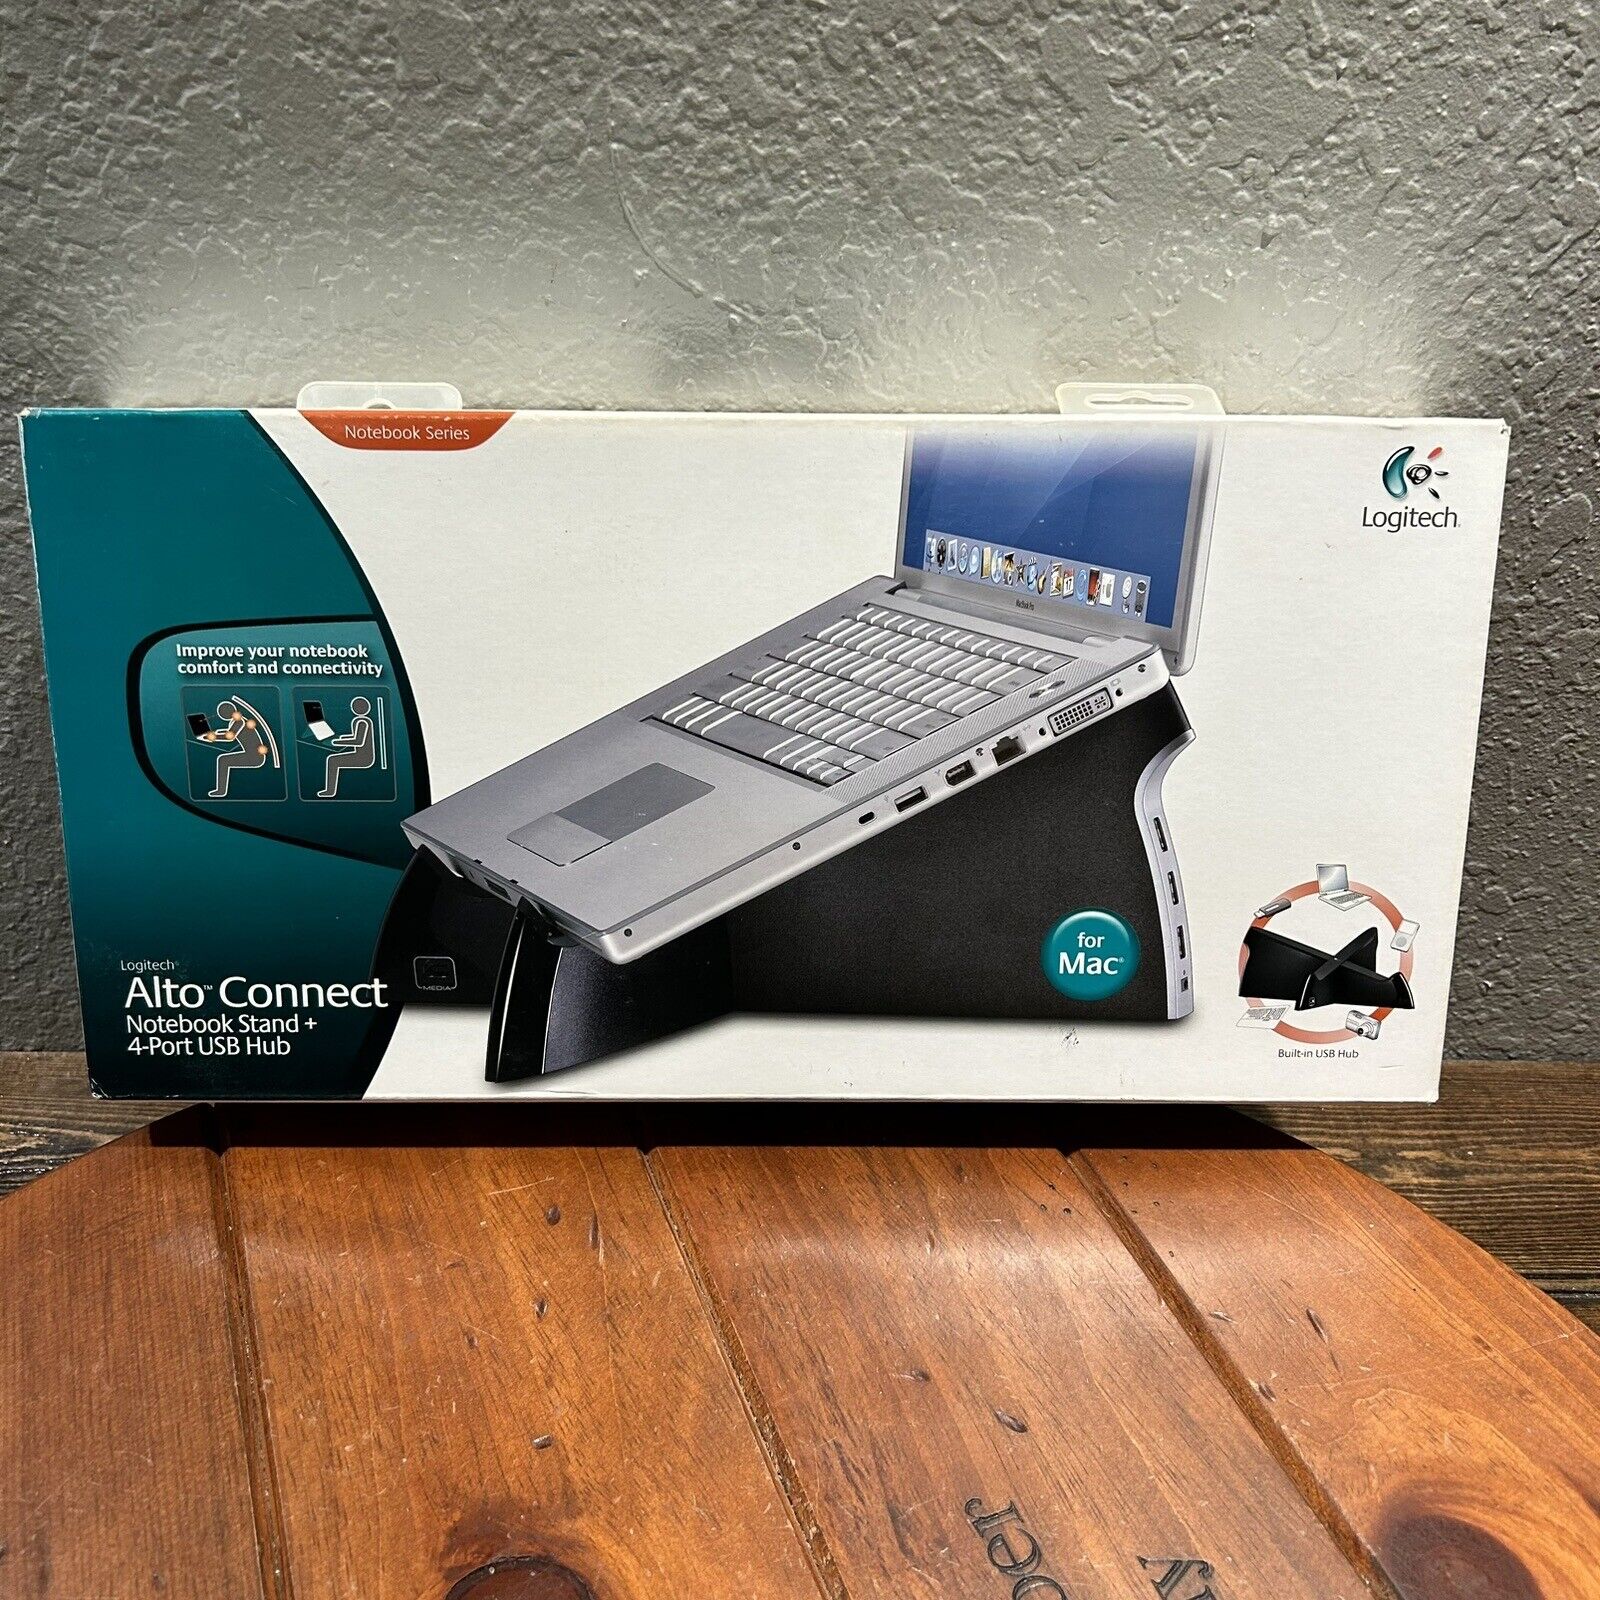 Logitech Alto Connect Notebook Stand & 4 port USB Hub for MAC